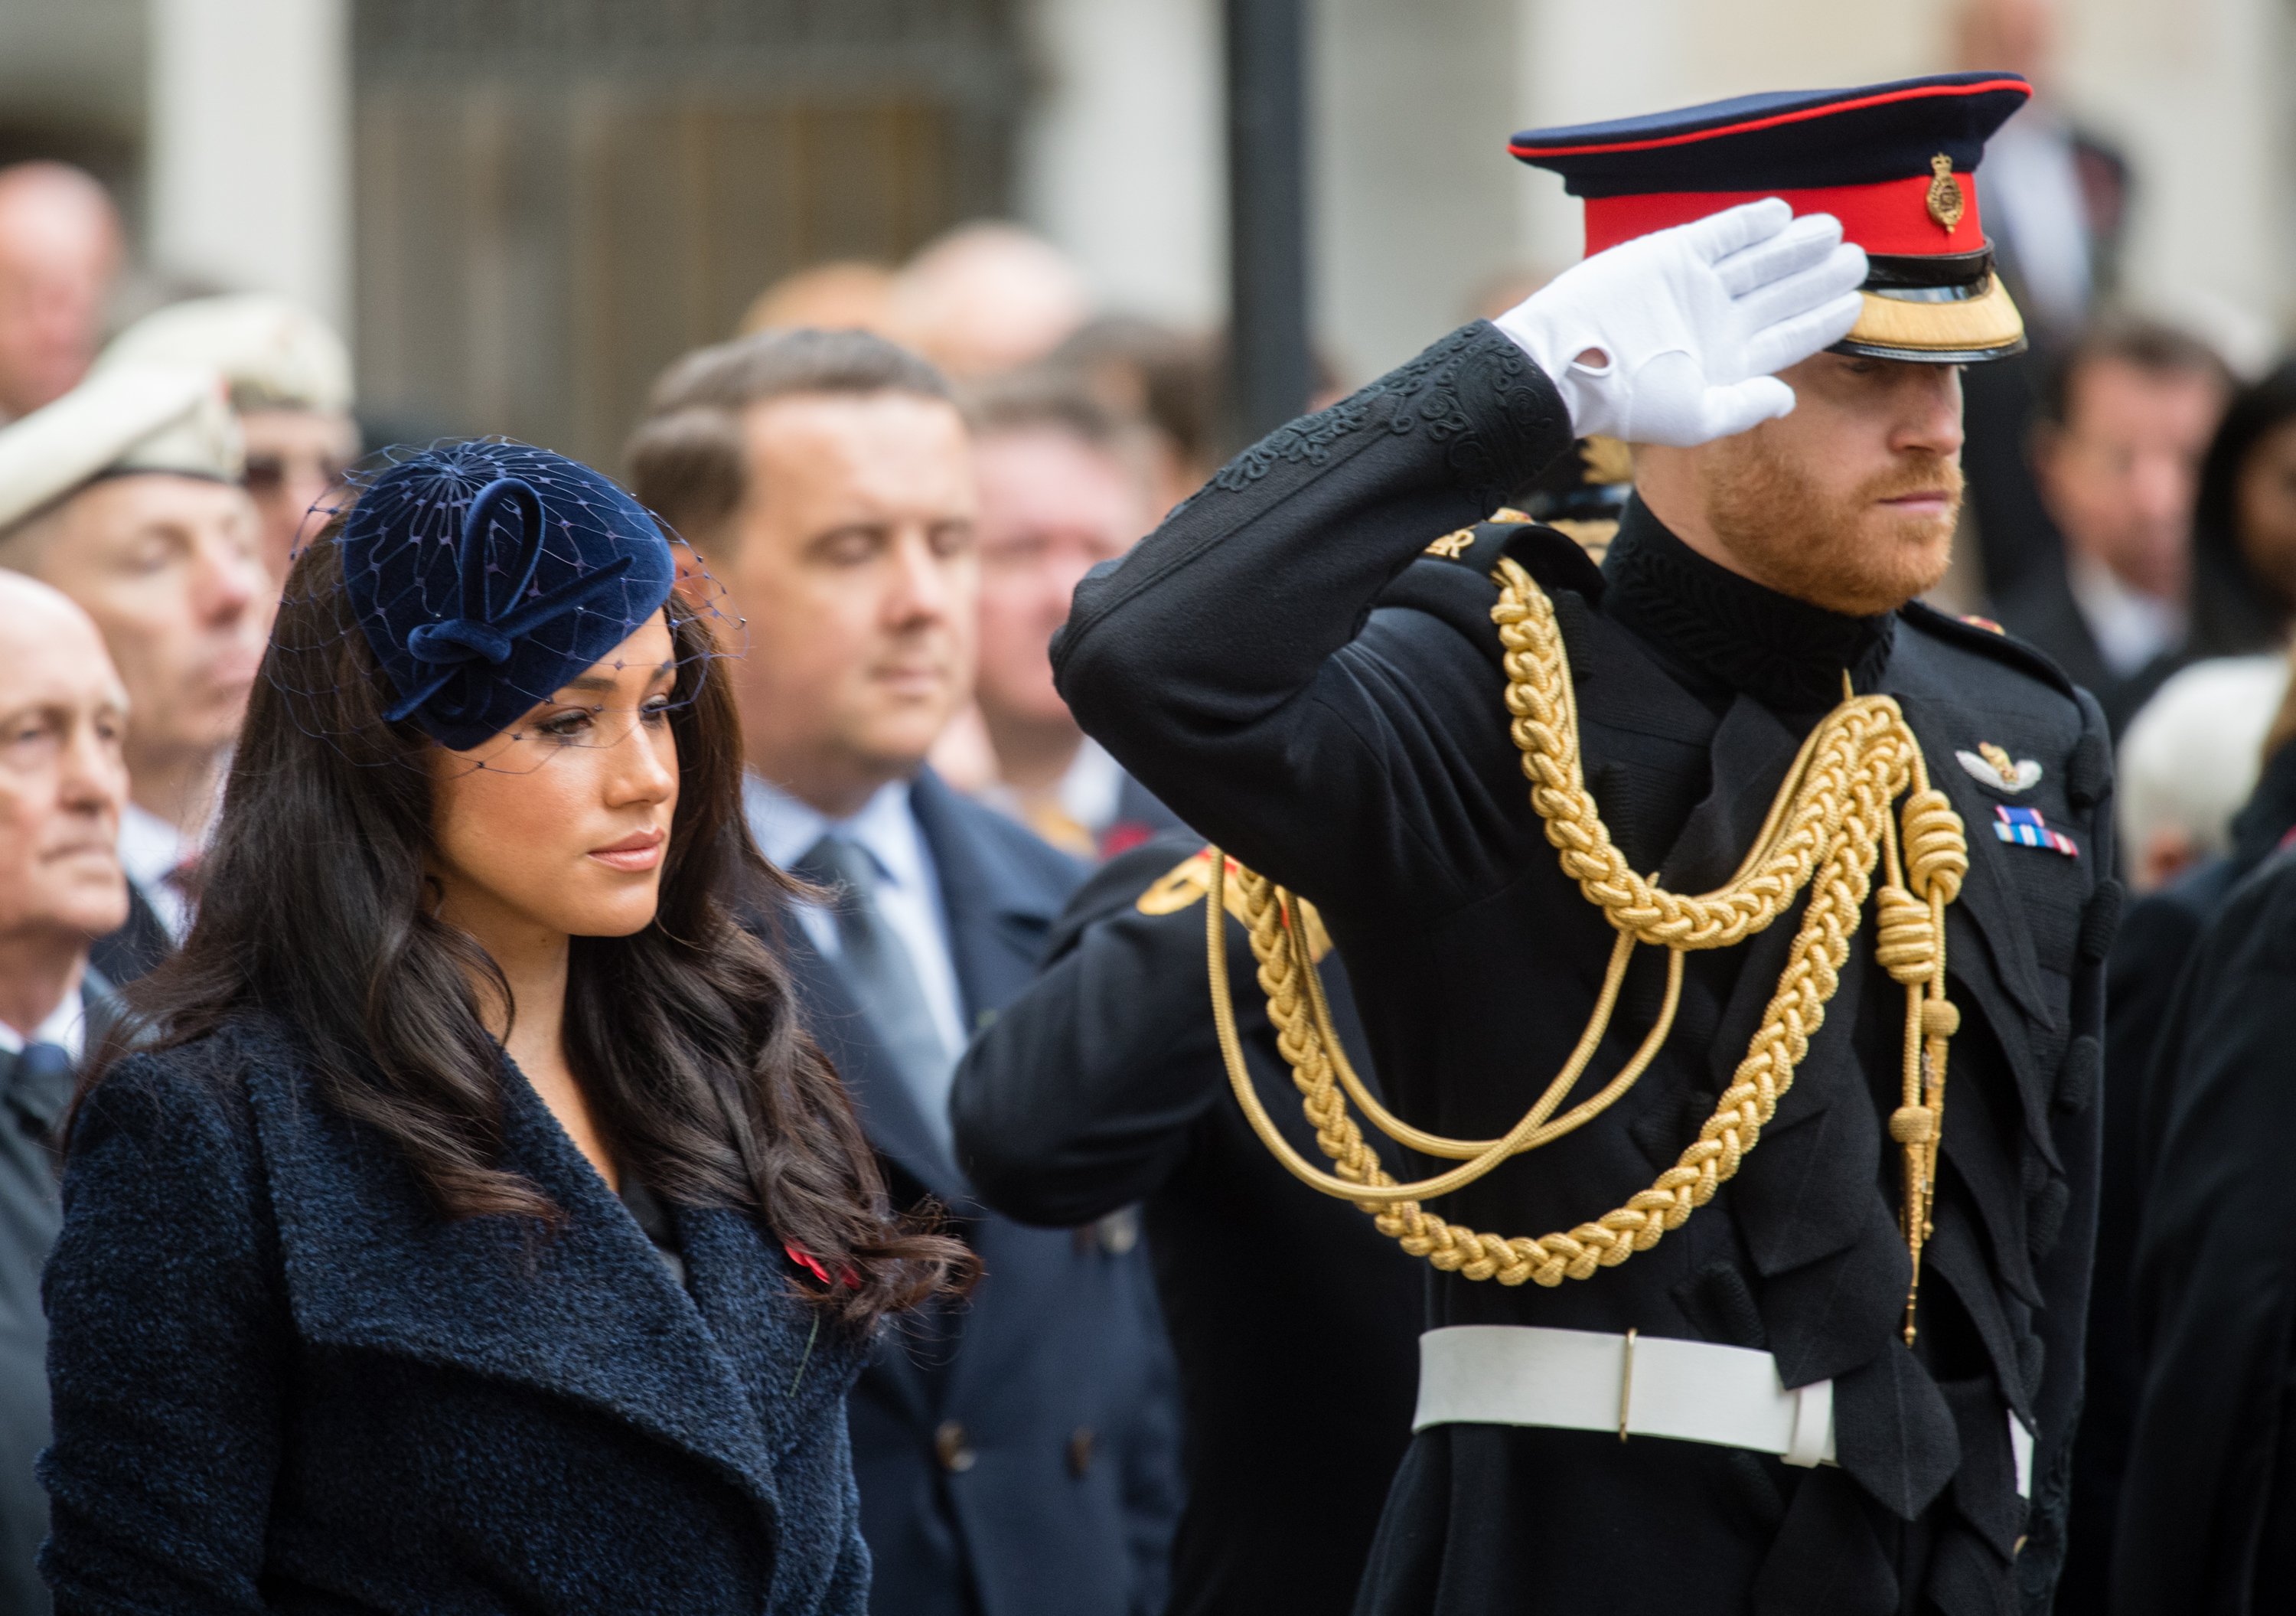 Duchess Meghan and Prince Harry at the 91st Field of Remembrance at Westminster Abbey on November 7, 2019, in London, England. | Source: Samir Hussein/WireImage/Getty Images